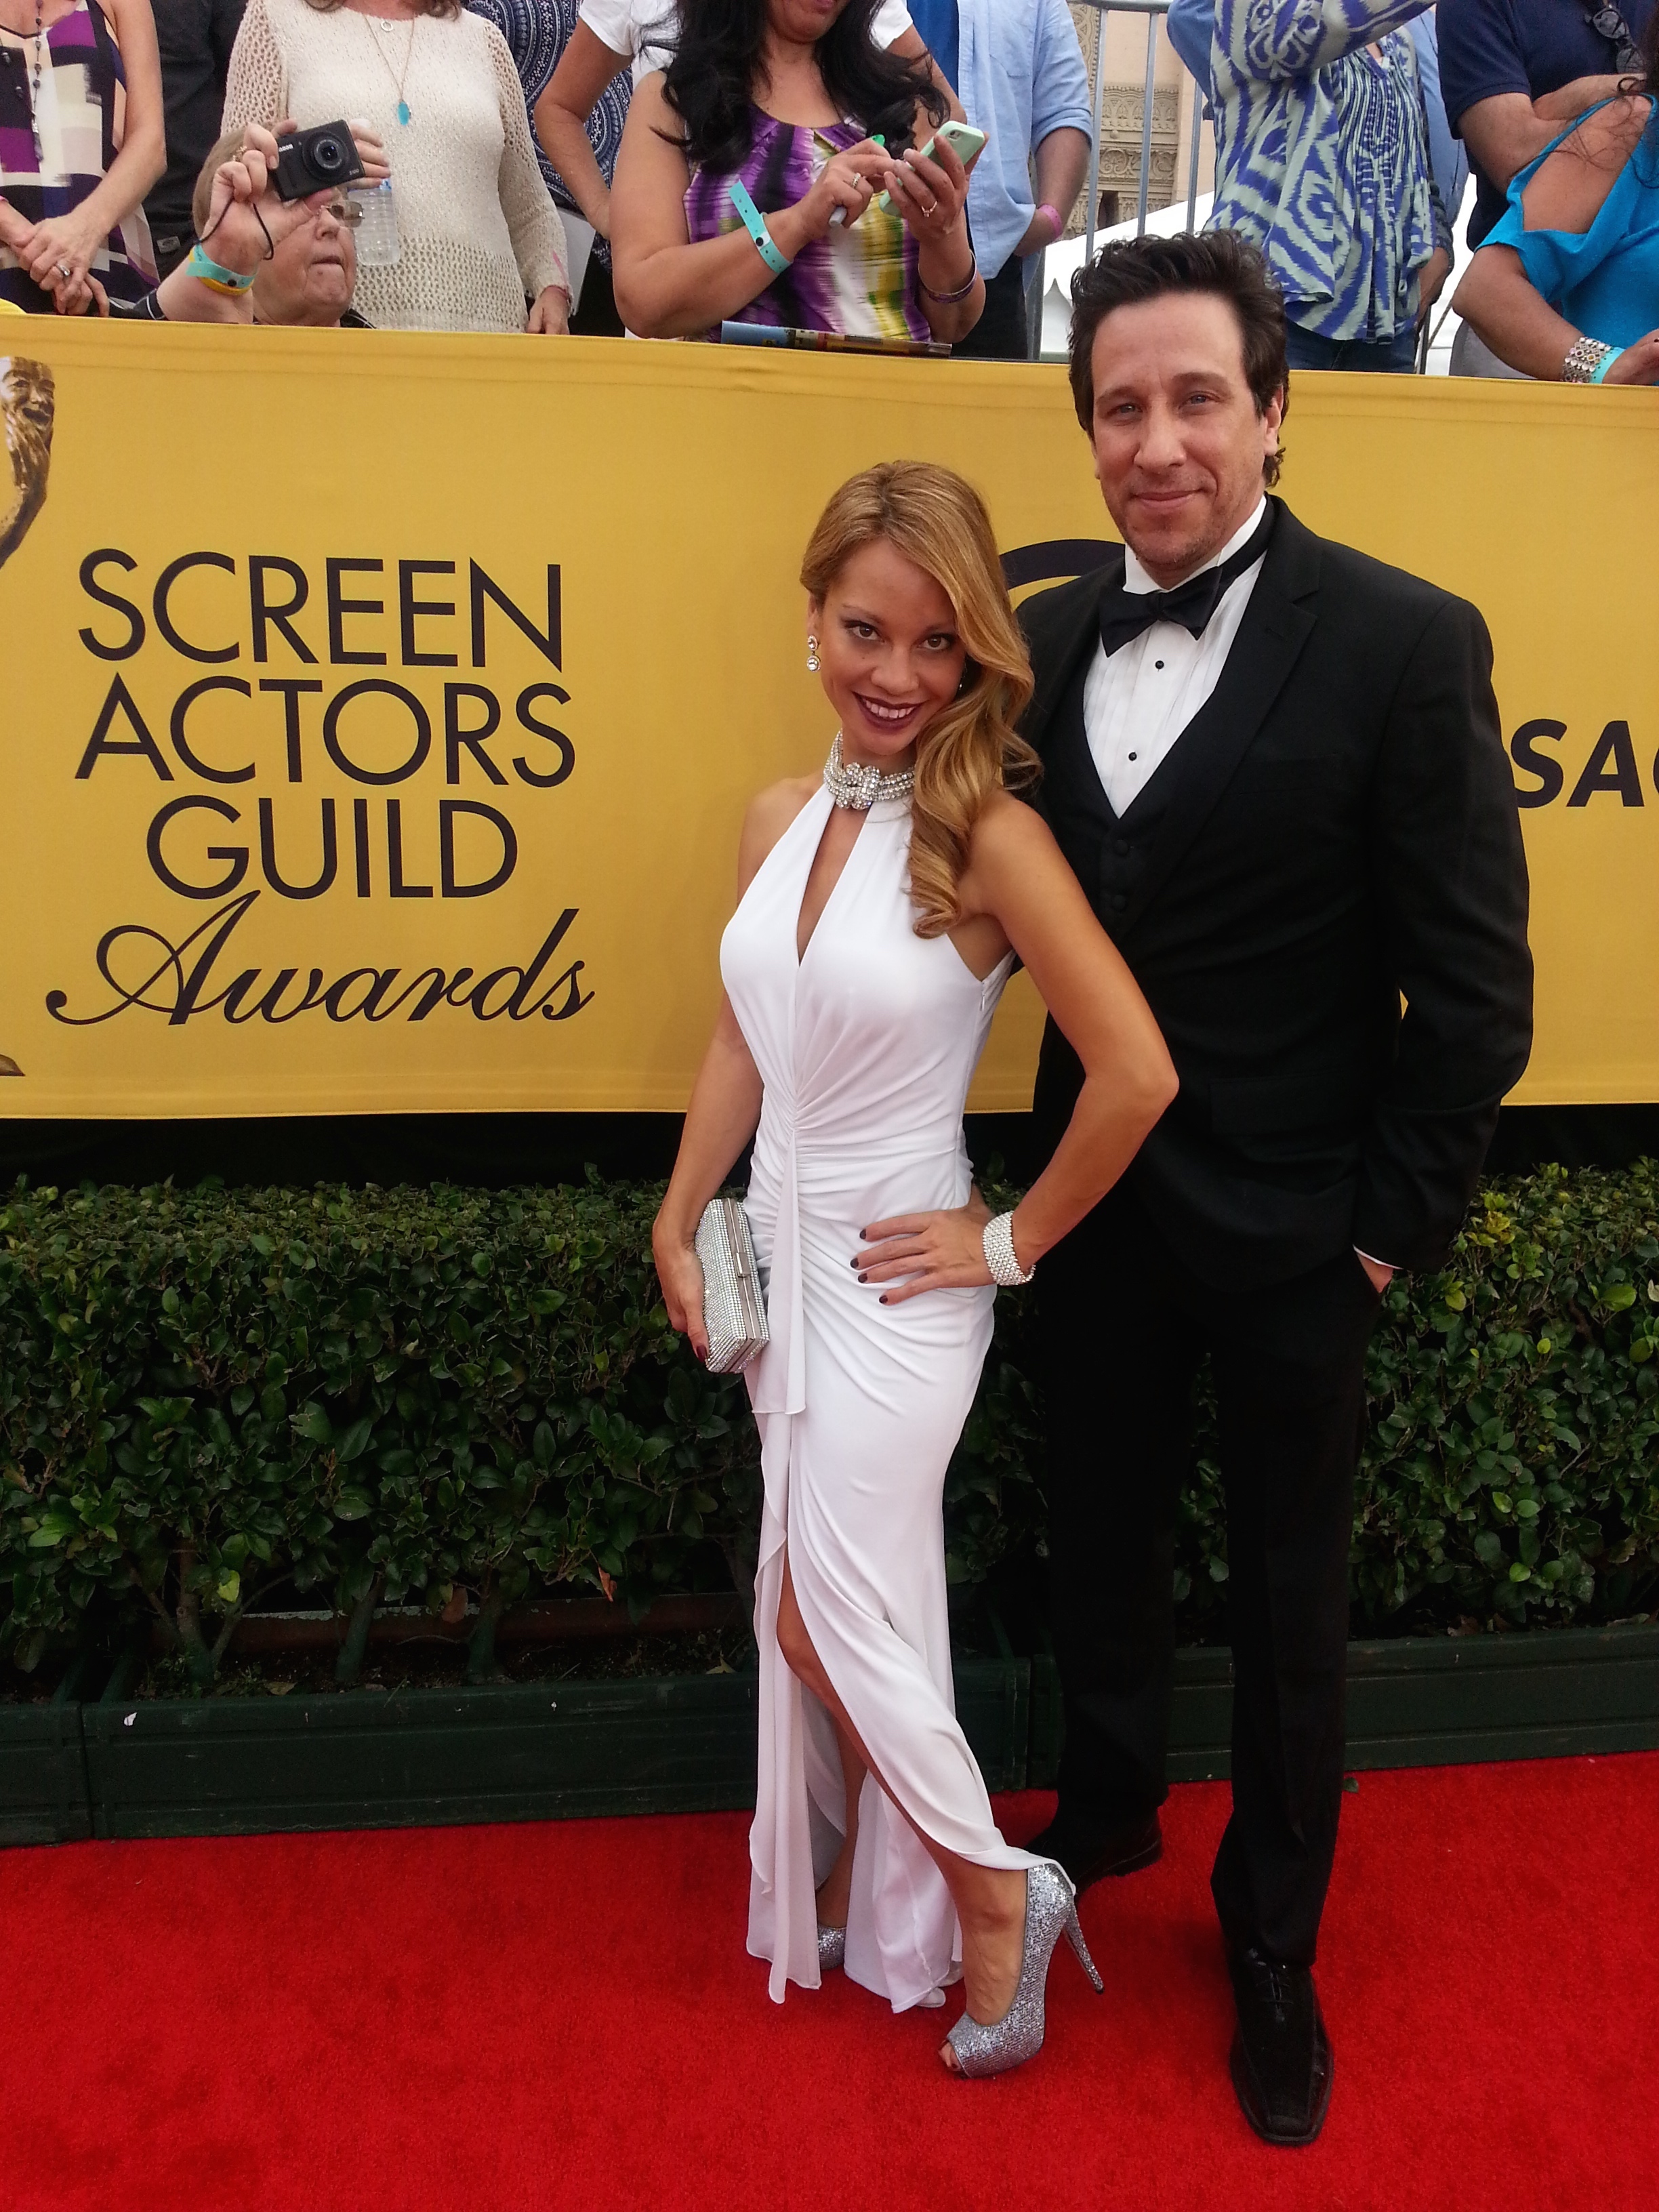 Doug Olear and Nicole Burlingame at event of The 21st Annual Screen Actors Guild Awards (2015)